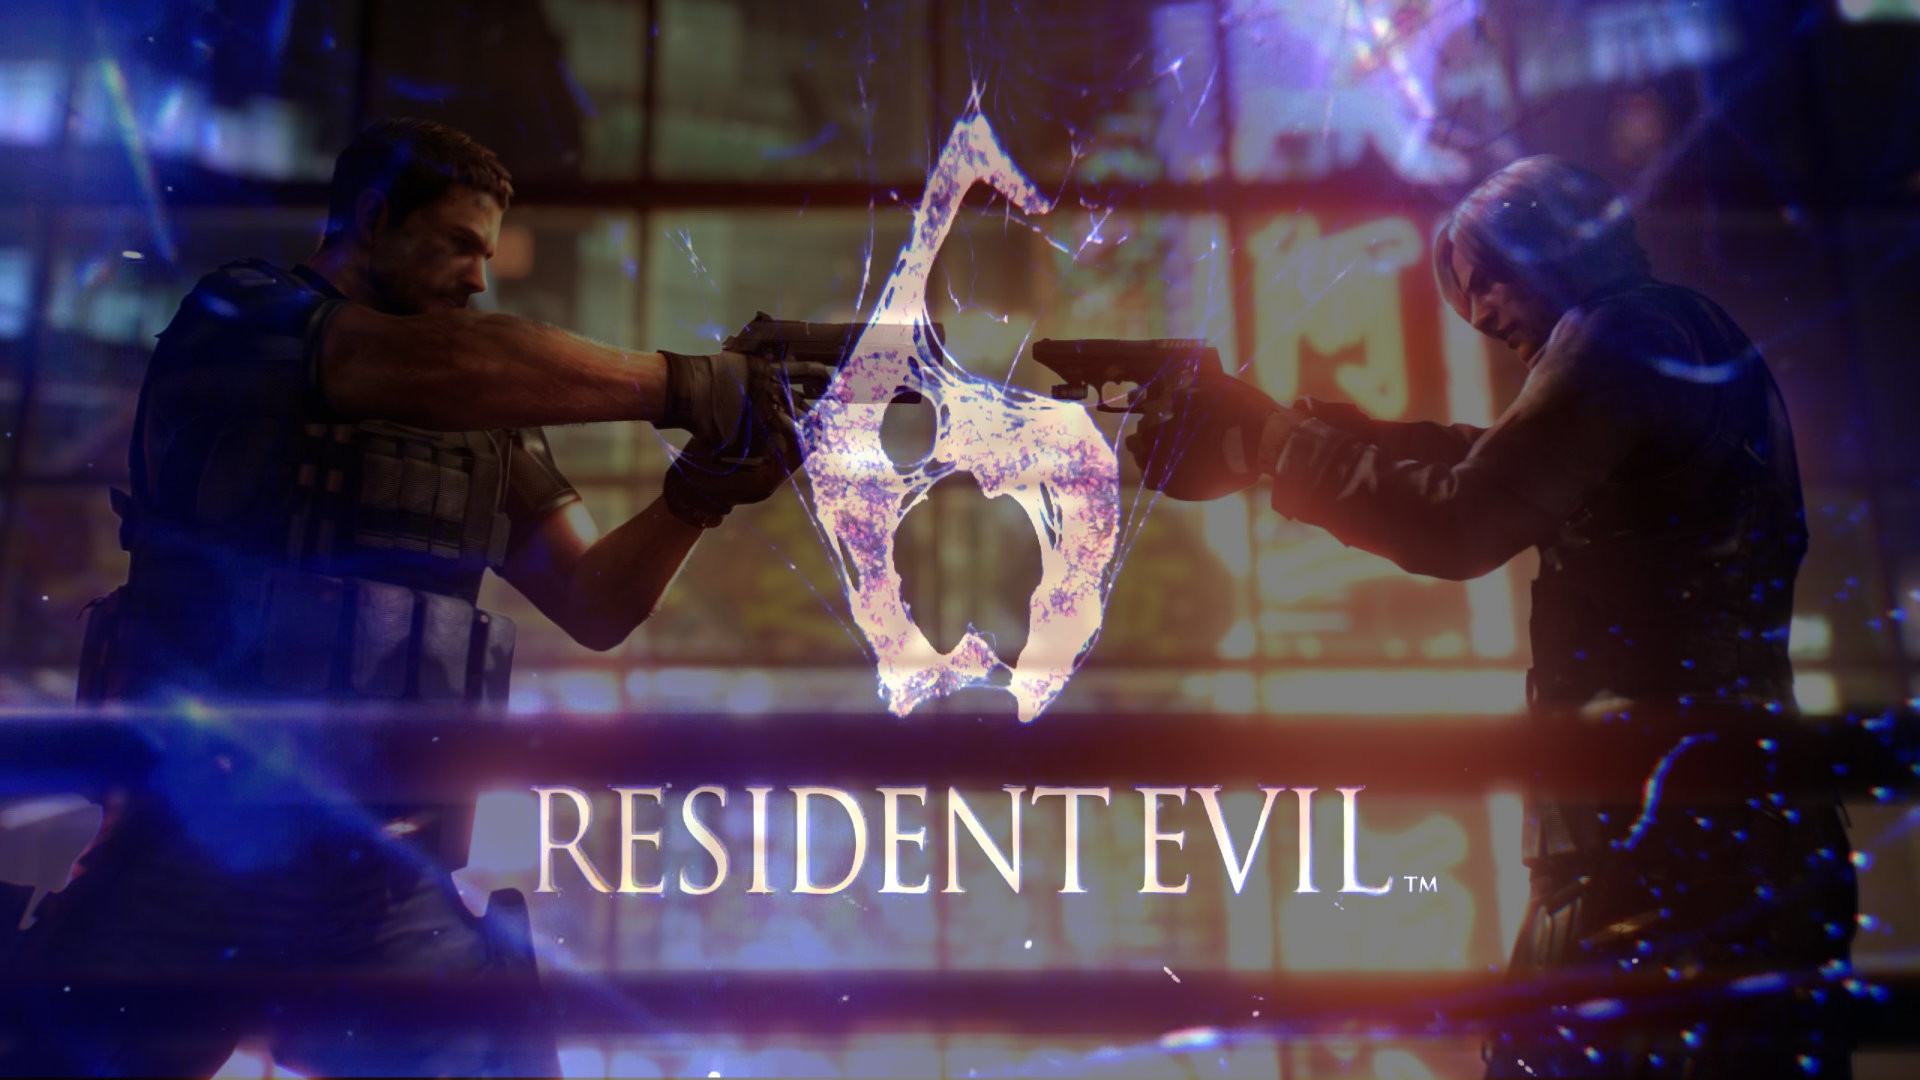 1920x1080 Lightning Returns Final Fantasy XIII images RESIDENT EVIL 6 HD wallpaper  and background photos